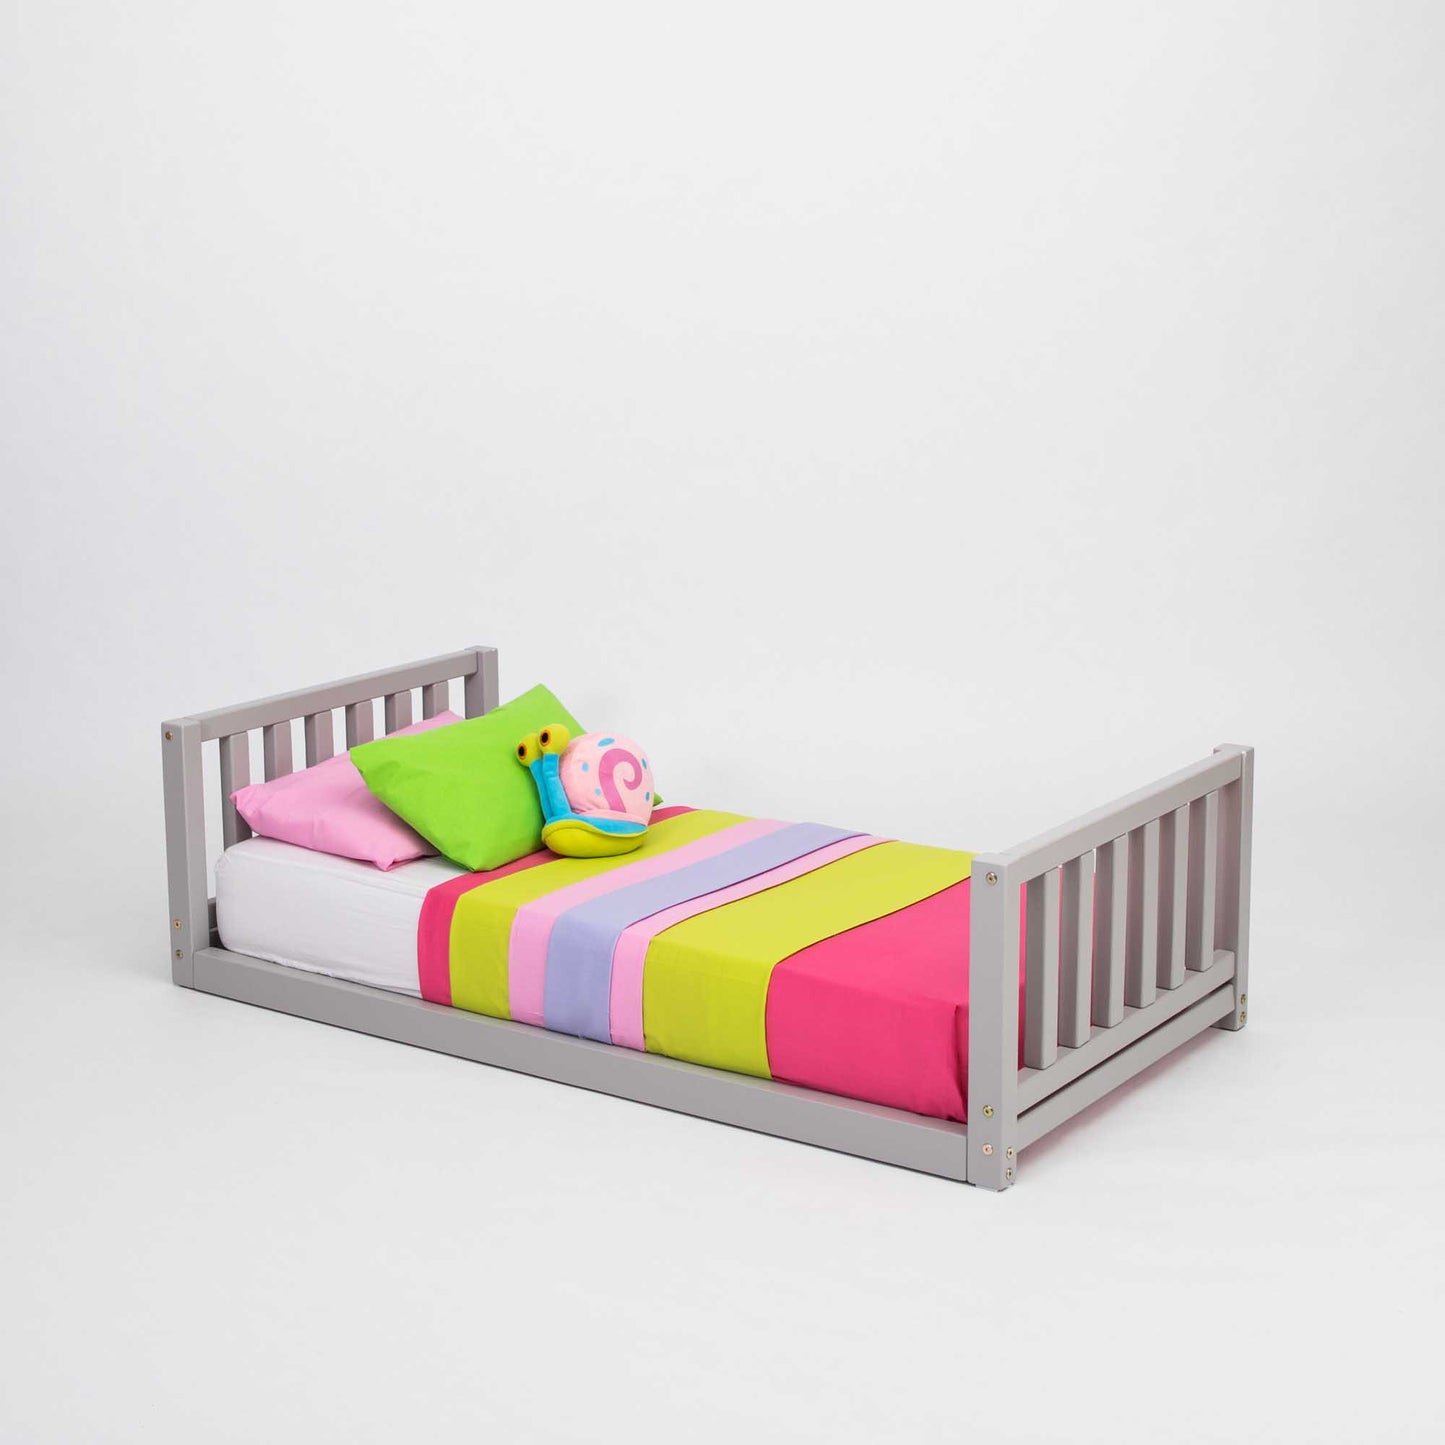 A 2-in-1 kid's bed on legs with a vertical rail headboard and footboard with a colorful blanket on it.